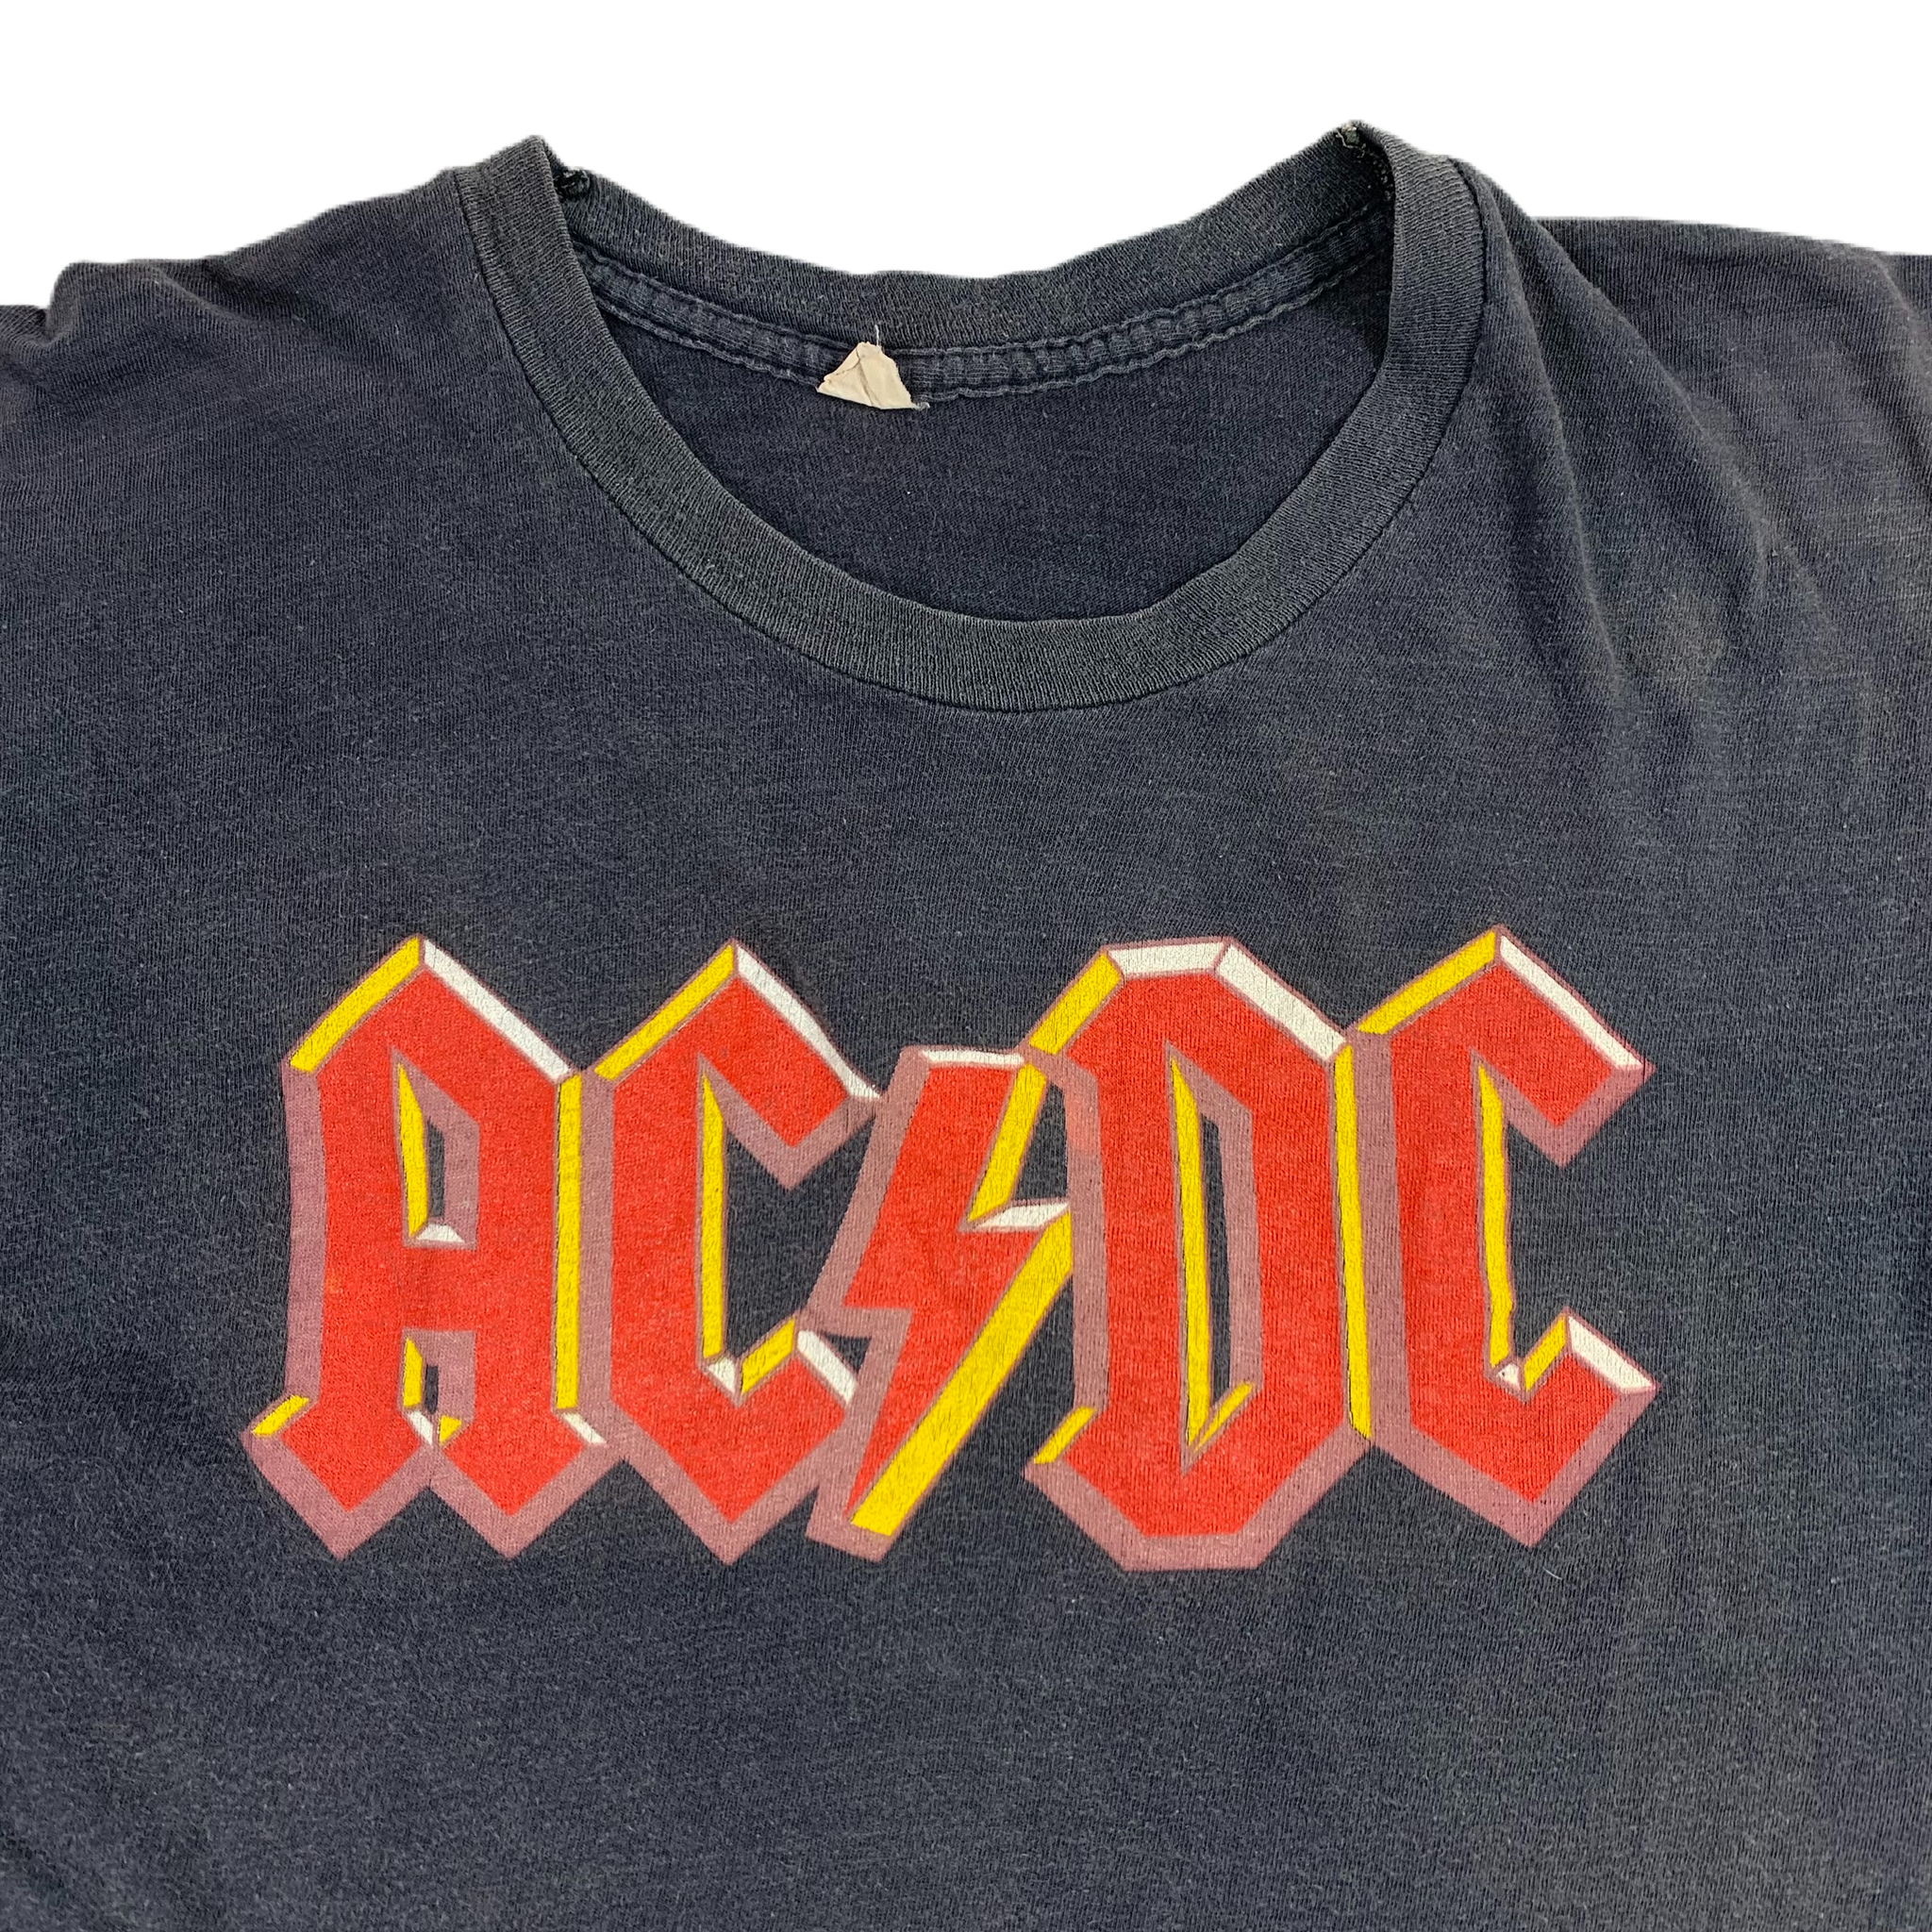 Vintage AC/DC To Hell" Tour T-Shirt jointcustodydc